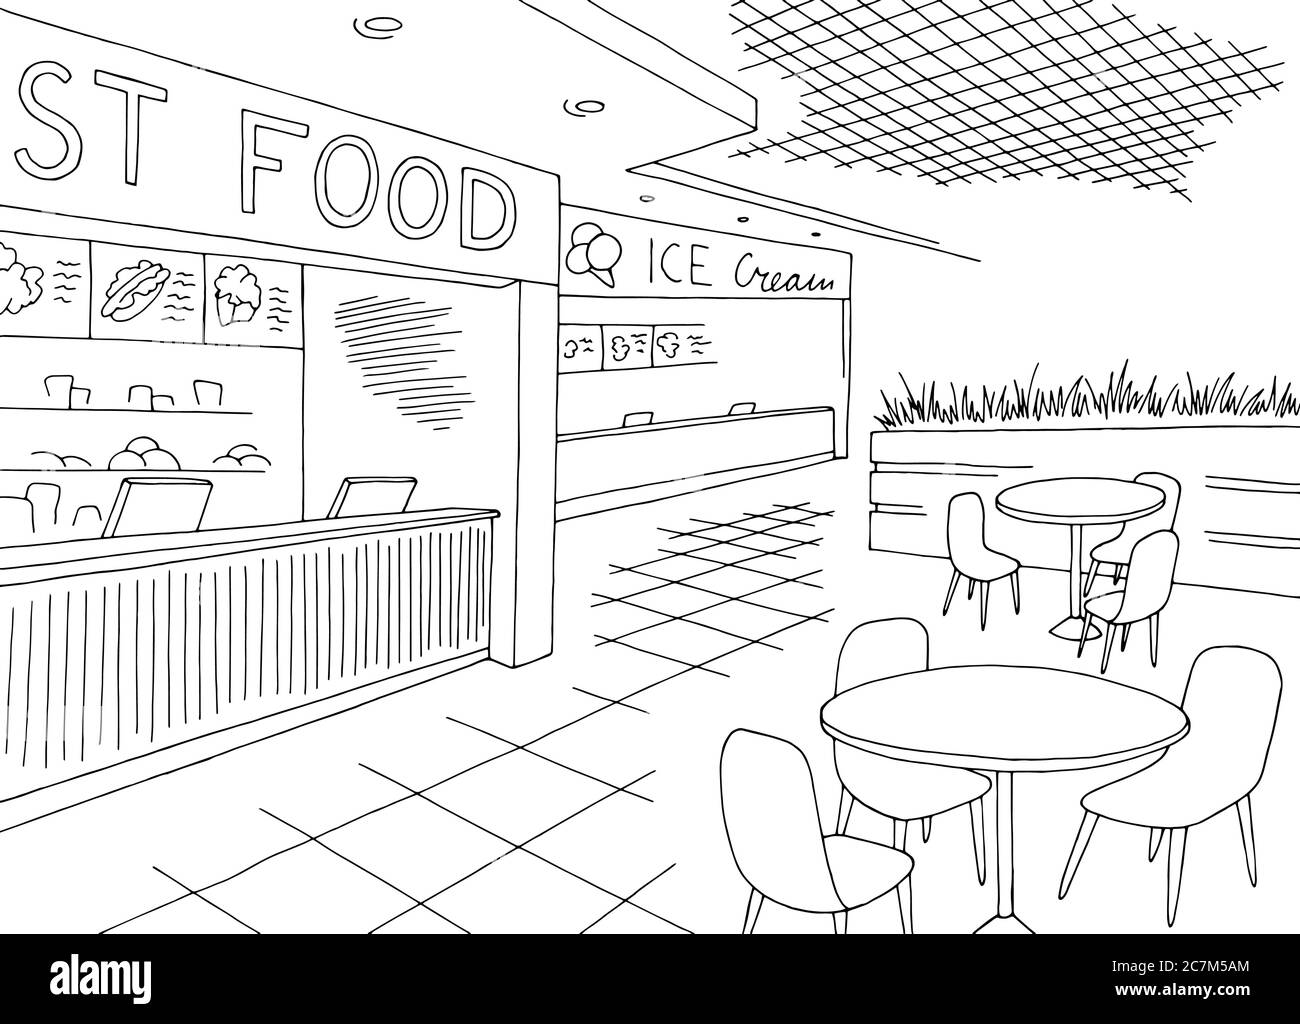 Cafe interior fast food court graphic black white sketch illustration vector Stock Vector